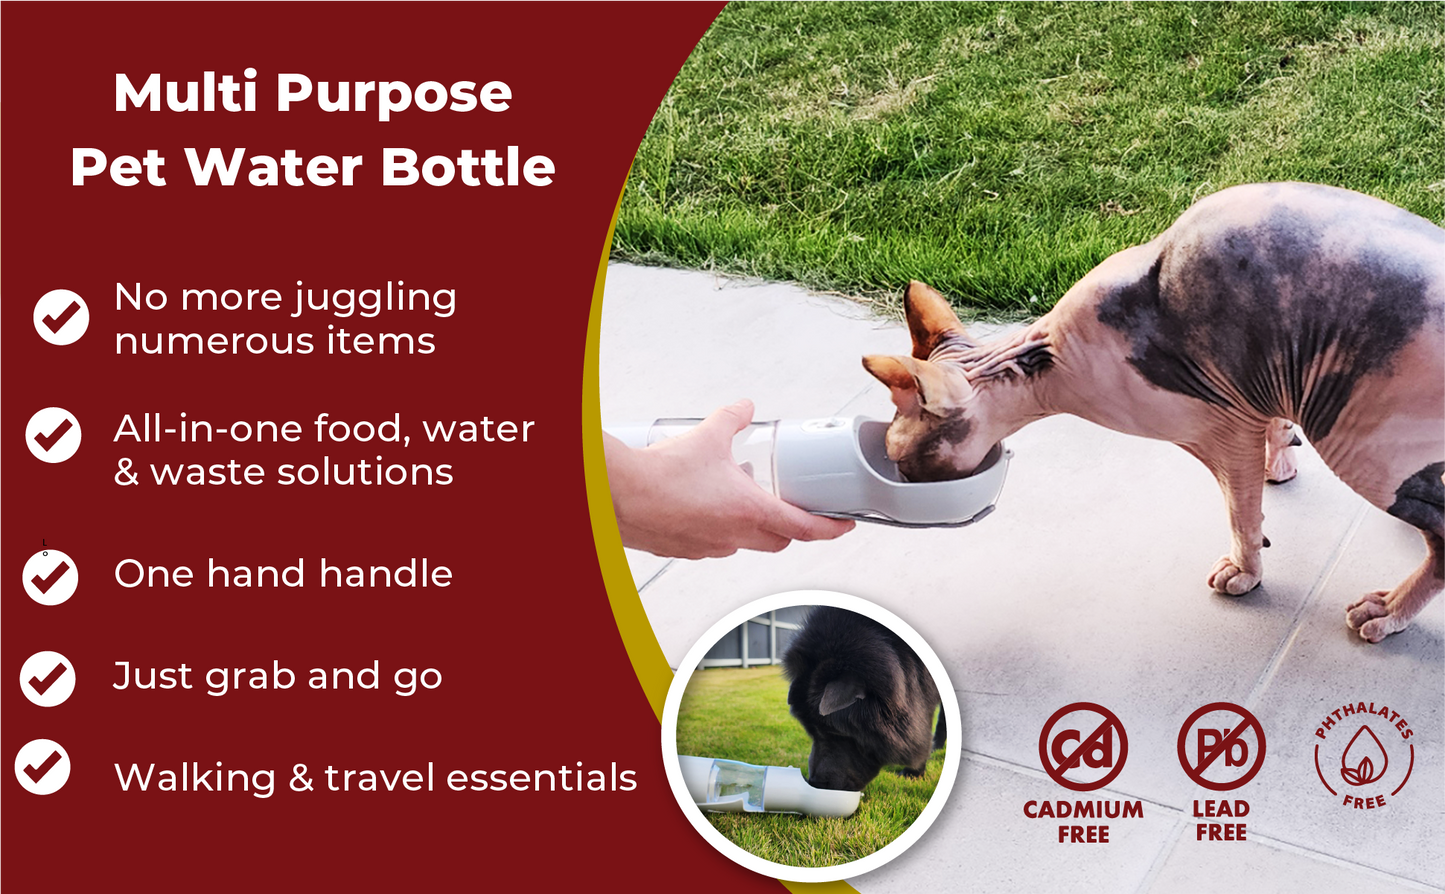 best portable dog water bottle for hiking best portable water bottle for dog portable puppy water bottle portable water dispenser for dogs pet travel water bottle gift for women dog training dog clothes for small dogs dog toys for small dogs dogs cute things dog enrichment toys essentials starter kit list basker christmas birthday pet presents puppy teething toys dog toy dog water bowl dispenser interactive dog toys dog pooper scooper bandana puppy sustainable dog toys eco dog toys pet water bottle travel 